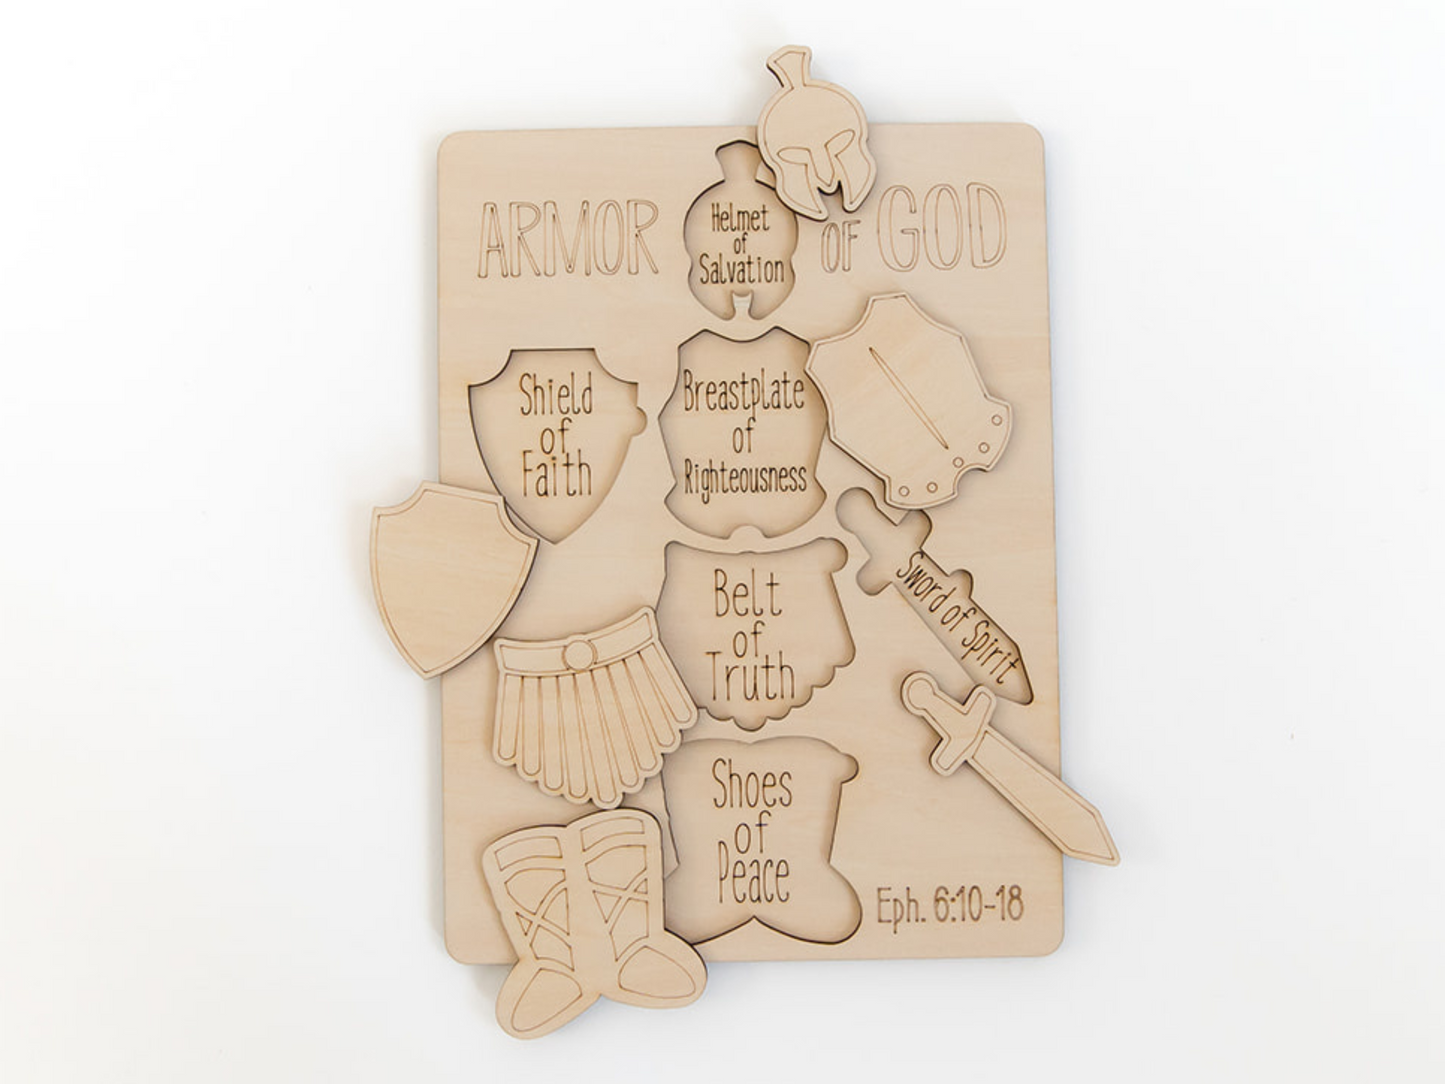 Armor of God Wooden Educational Puzzle for Kids